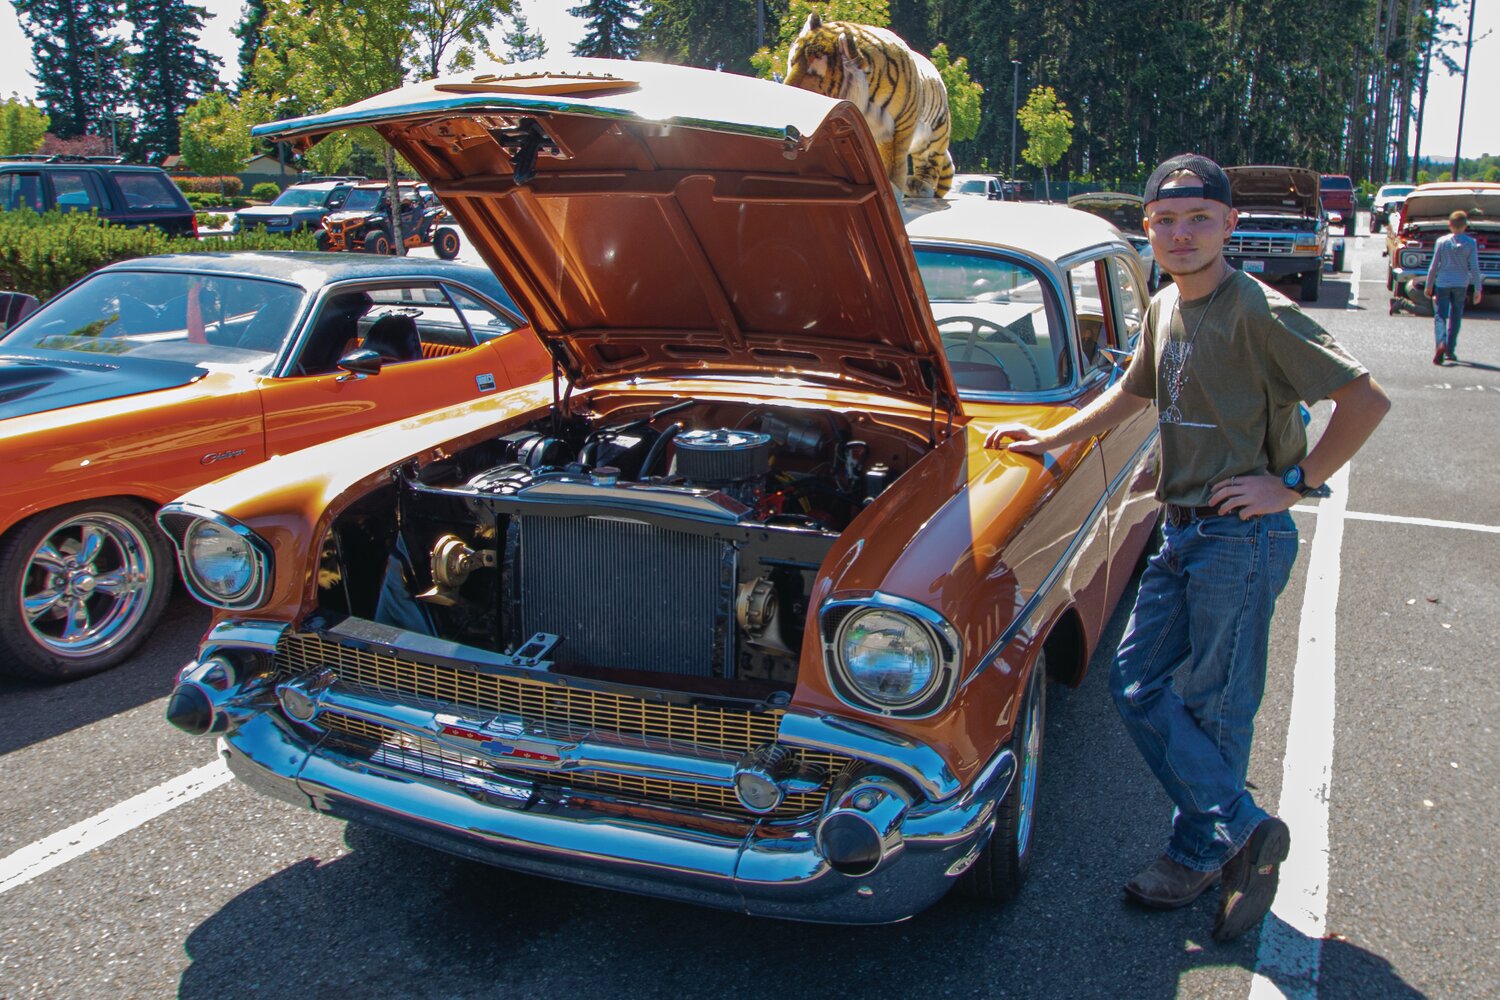 Yelm High School freshman Trenton McKinley shows his grandparents’ 1957 Chevrolet Del Ray Club Coupe at the Yelm High School car show on Sunday, June 4.